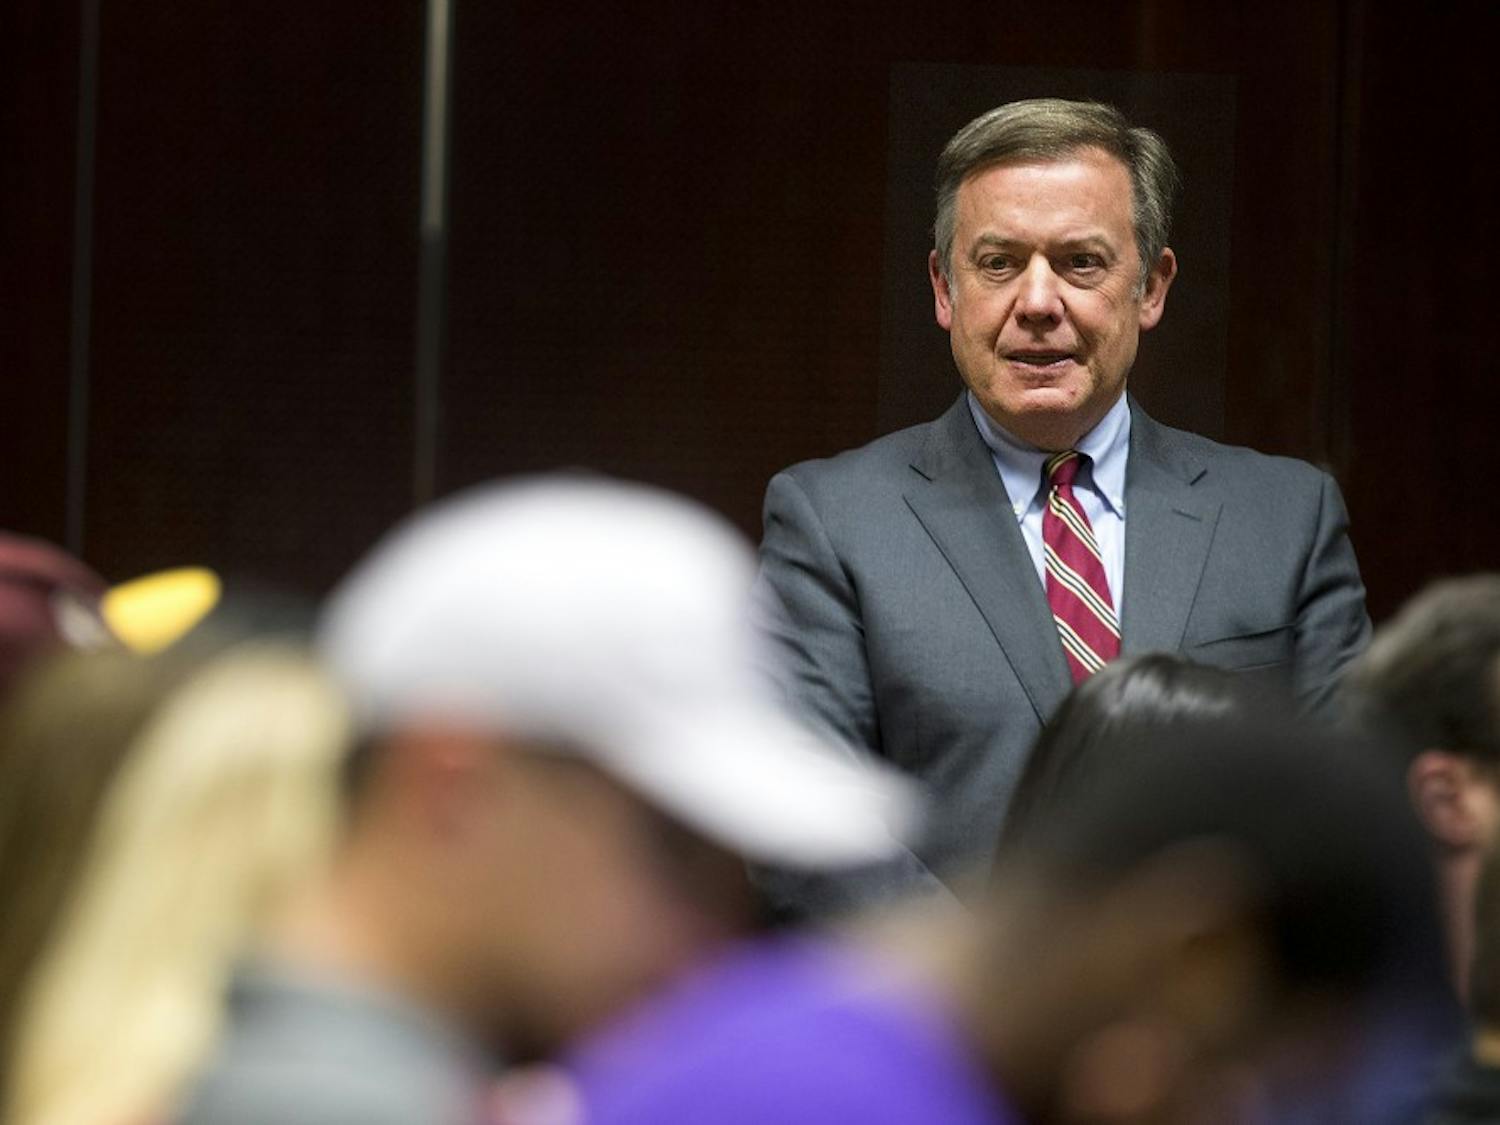 ASU President Michael Crow looks around the room after arriving to a student forum hosted by USG in the MU on Thursday, March 23, 2017. 